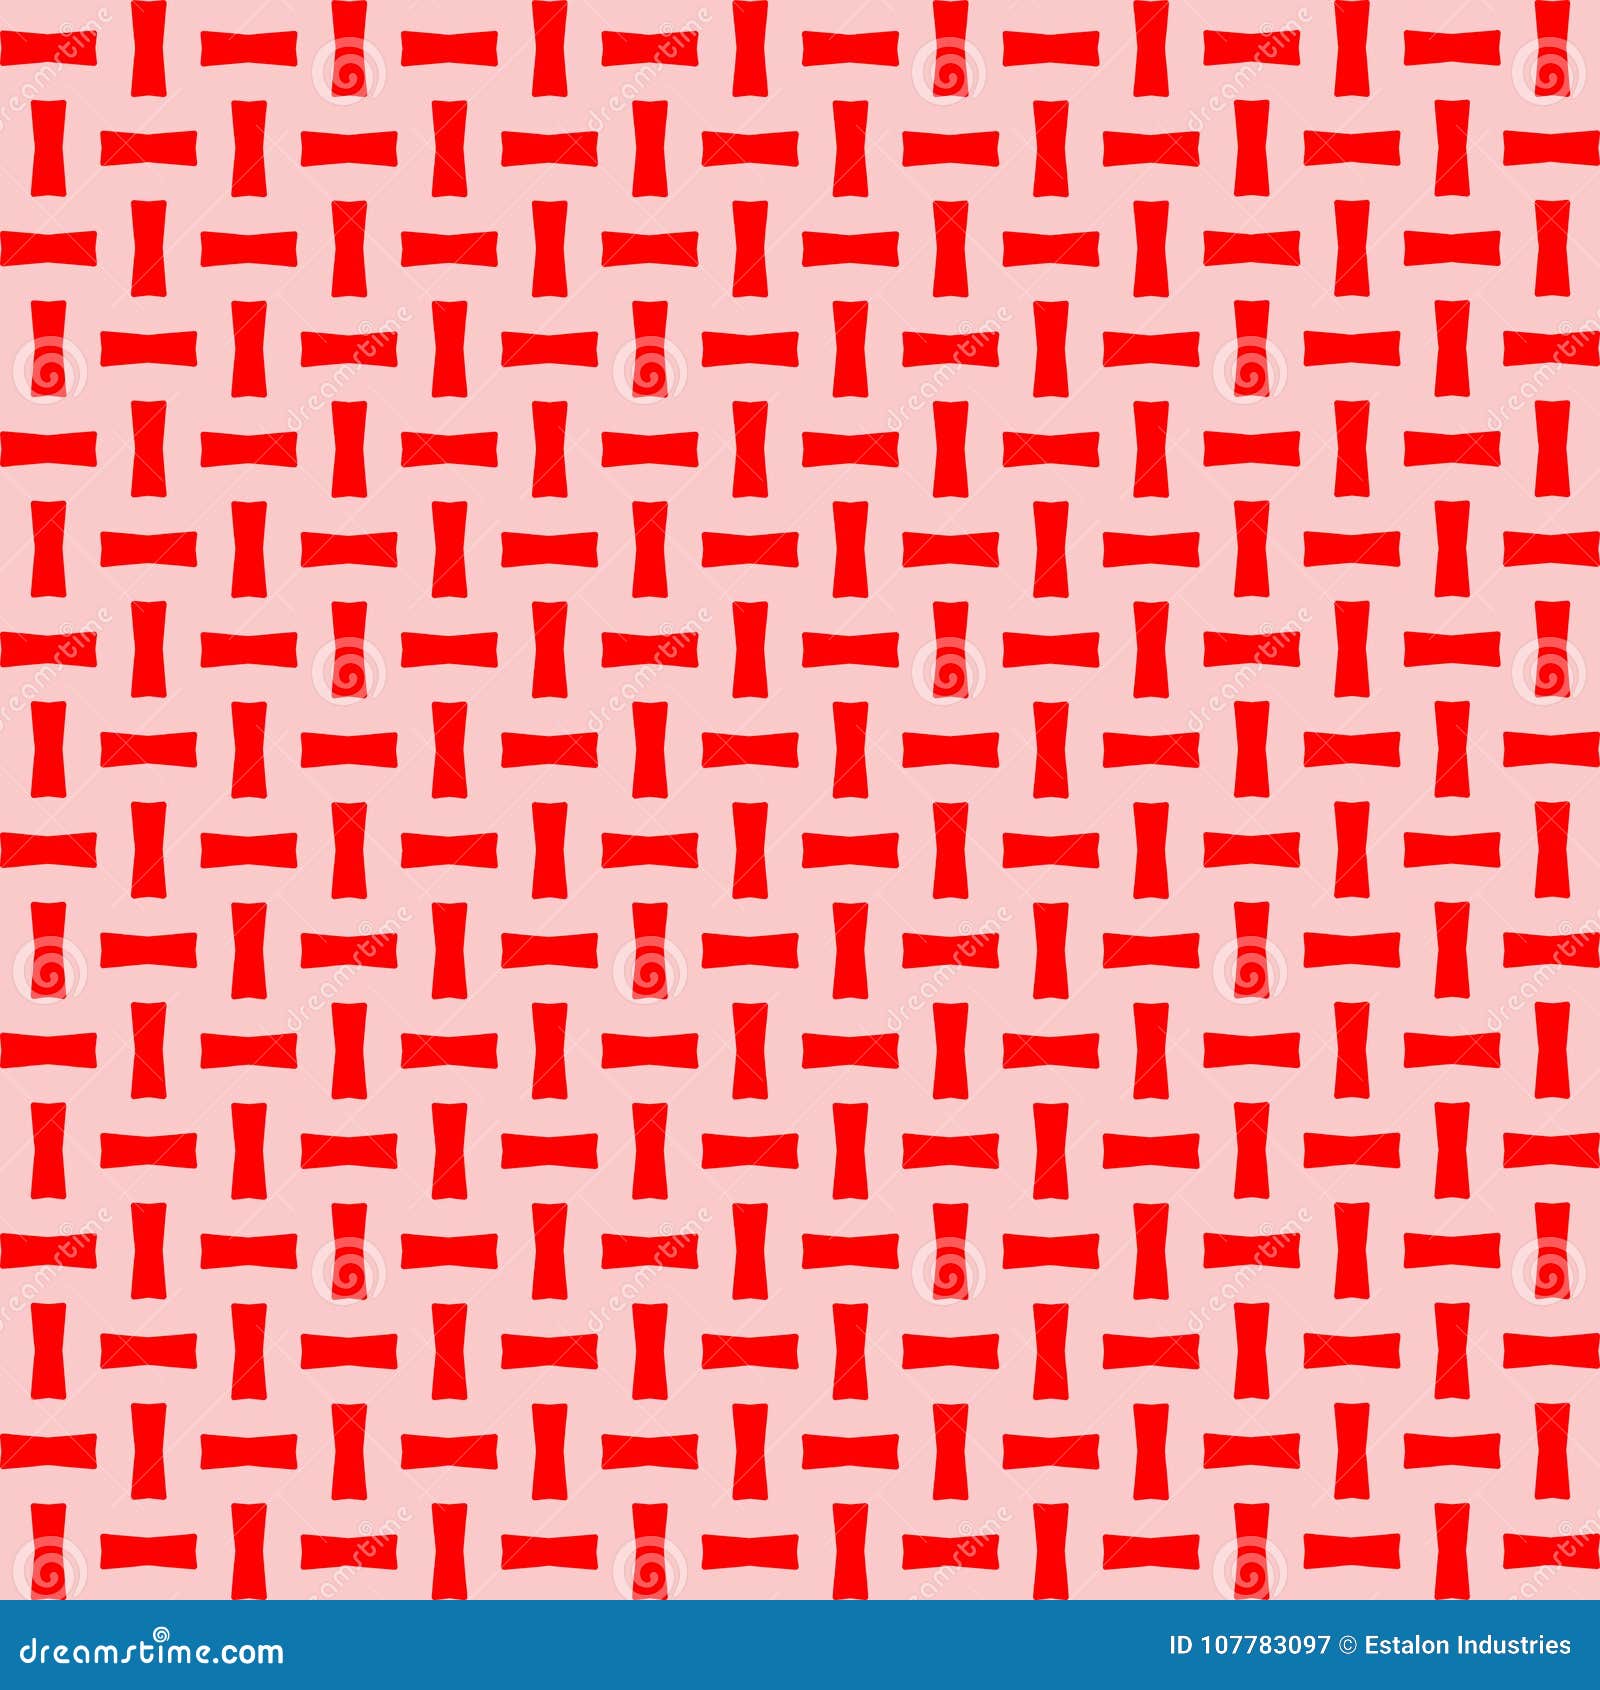 Red Weave Repeat Pattern Background Stock Illustration - Illustration ...